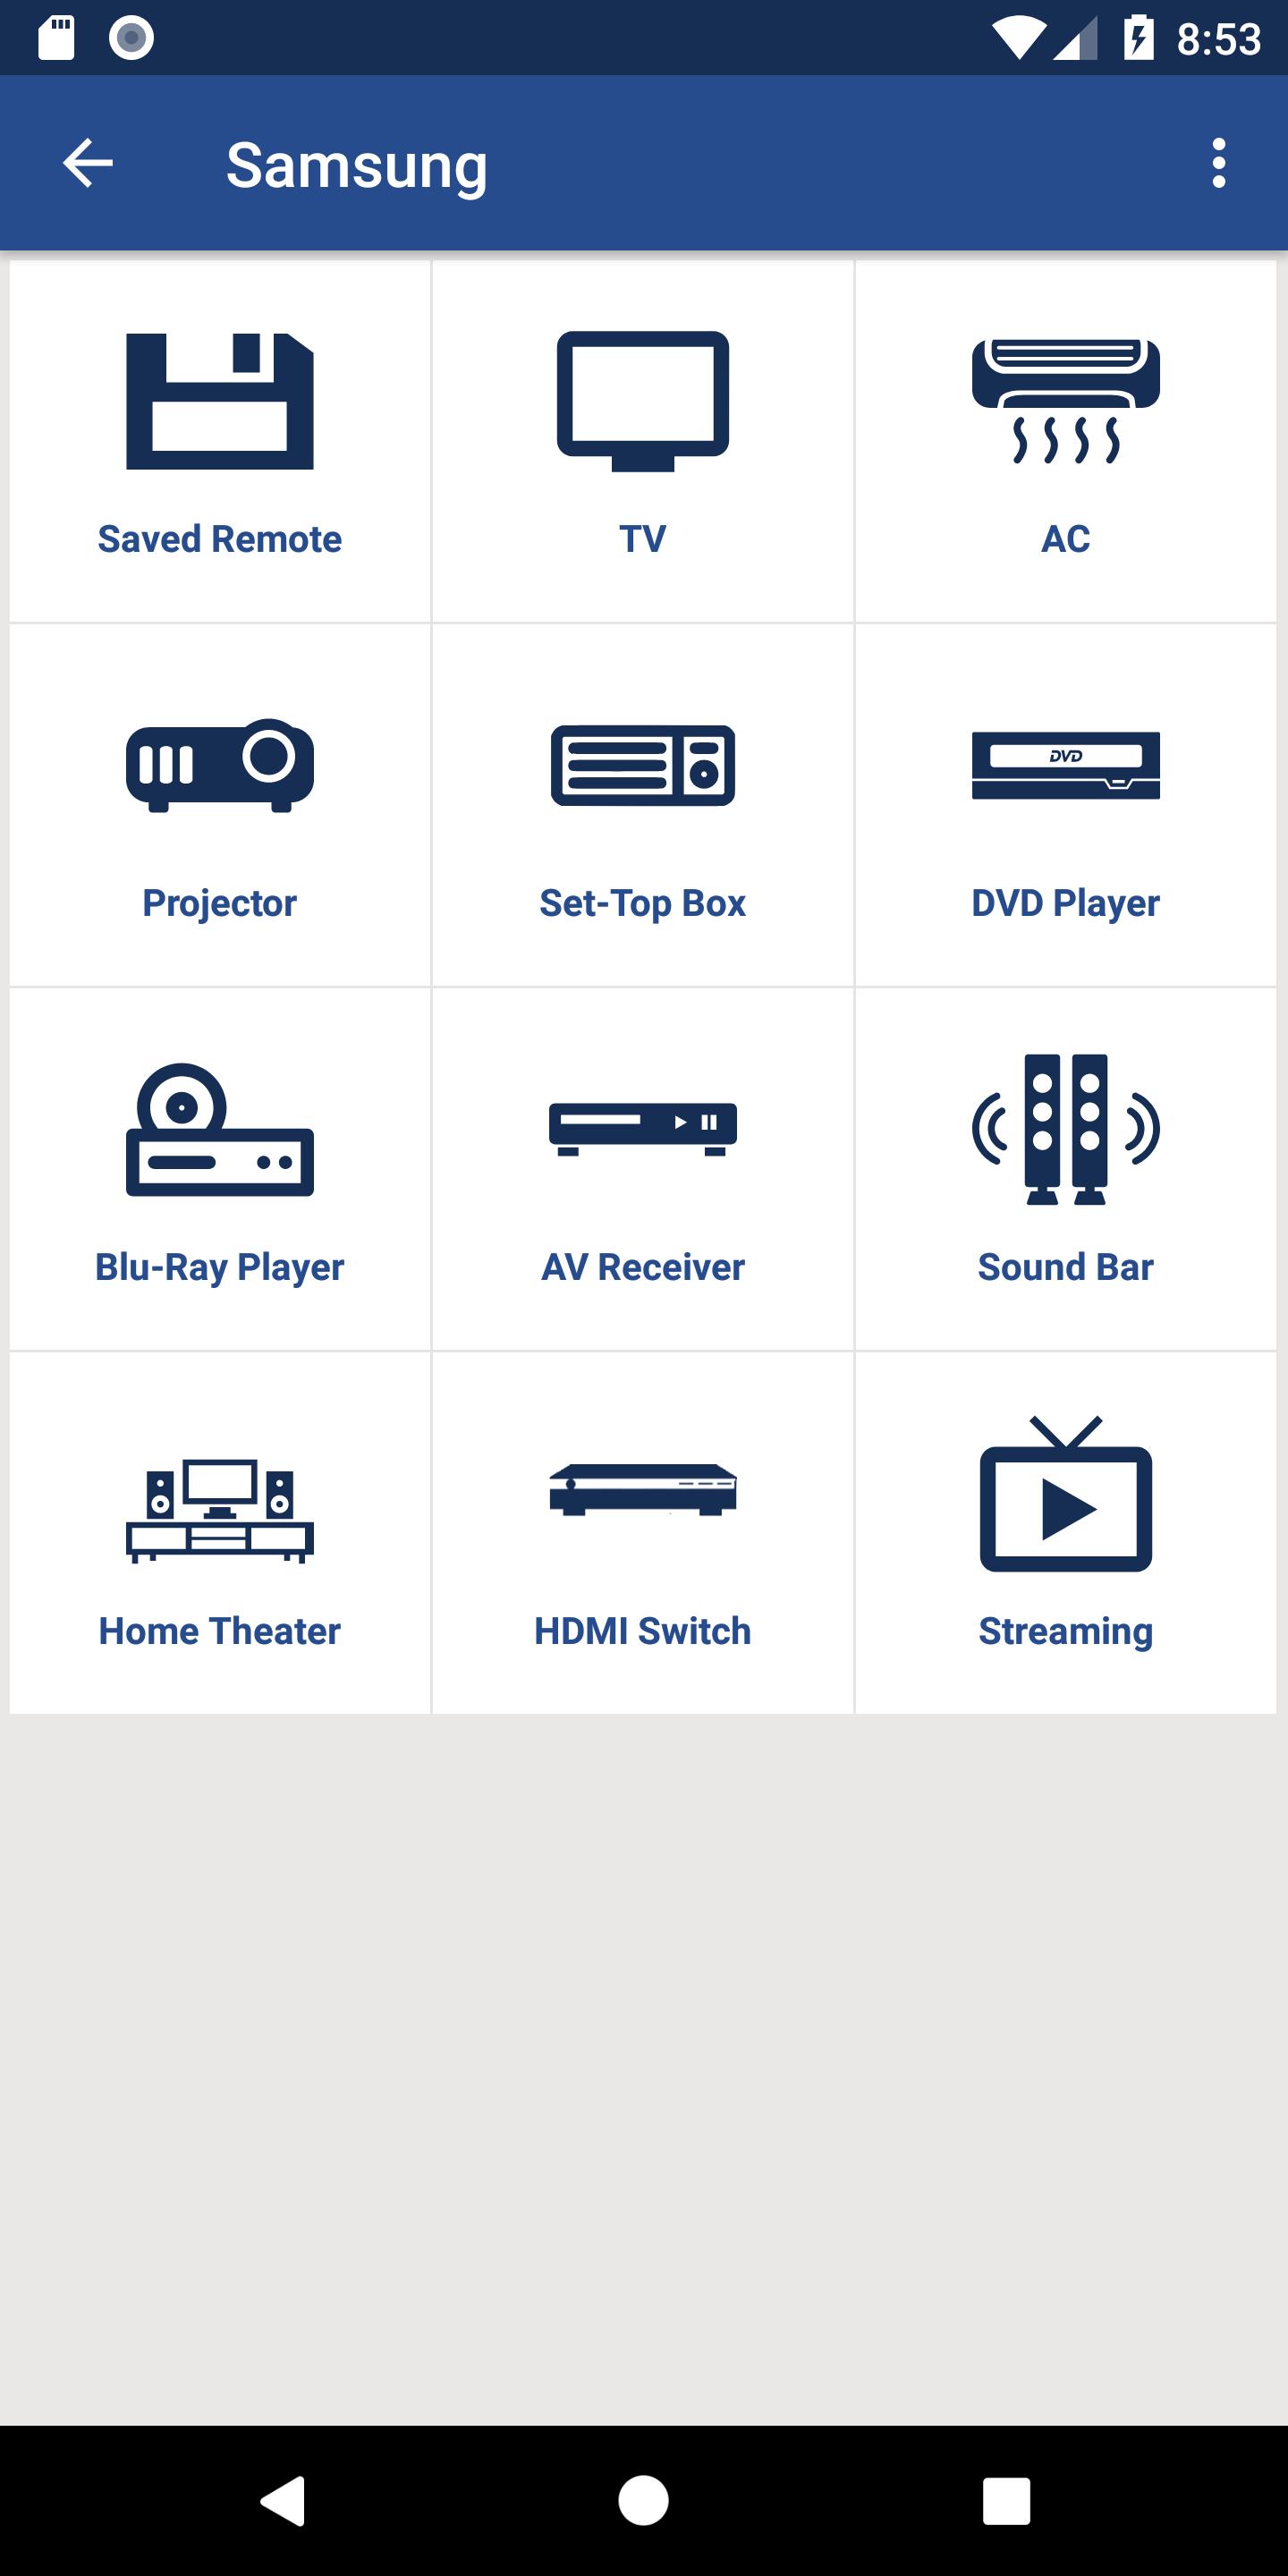 Samsung DVD Remote APK for Android Download